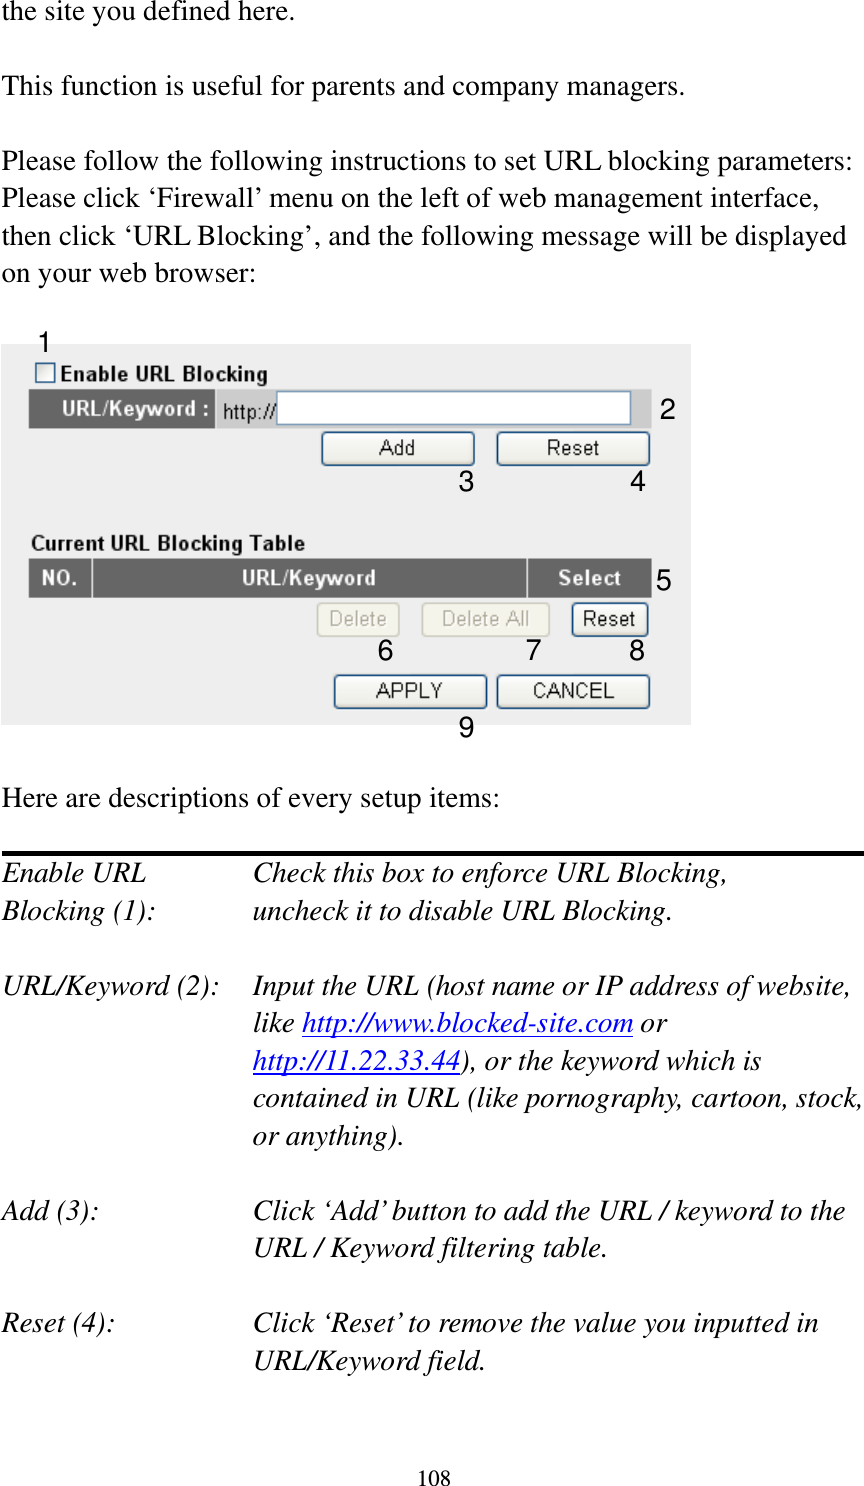 108 the site you defined here.  This function is useful for parents and company managers.  Please follow the following instructions to set URL blocking parameters: Please click ‘Firewall’ menu on the left of web management interface, then click ‘URL Blocking’, and the following message will be displayed on your web browser:    Here are descriptions of every setup items:  Enable URL      Check this box to enforce URL Blocking, Blocking (1):      uncheck it to disable URL Blocking.  URL/Keyword (2):    Input the URL (host name or IP address of website, like http://www.blocked-site.com or http://11.22.33.44), or the keyword which is contained in URL (like pornography, cartoon, stock, or anything).  Add (3):    Click ‘Add’ button to add the URL / keyword to the URL / Keyword filtering table.  Reset (4):    Click ‘Reset’ to remove the value you inputted in URL/Keyword field.  2 3 4 5 6 7 8 9 1 